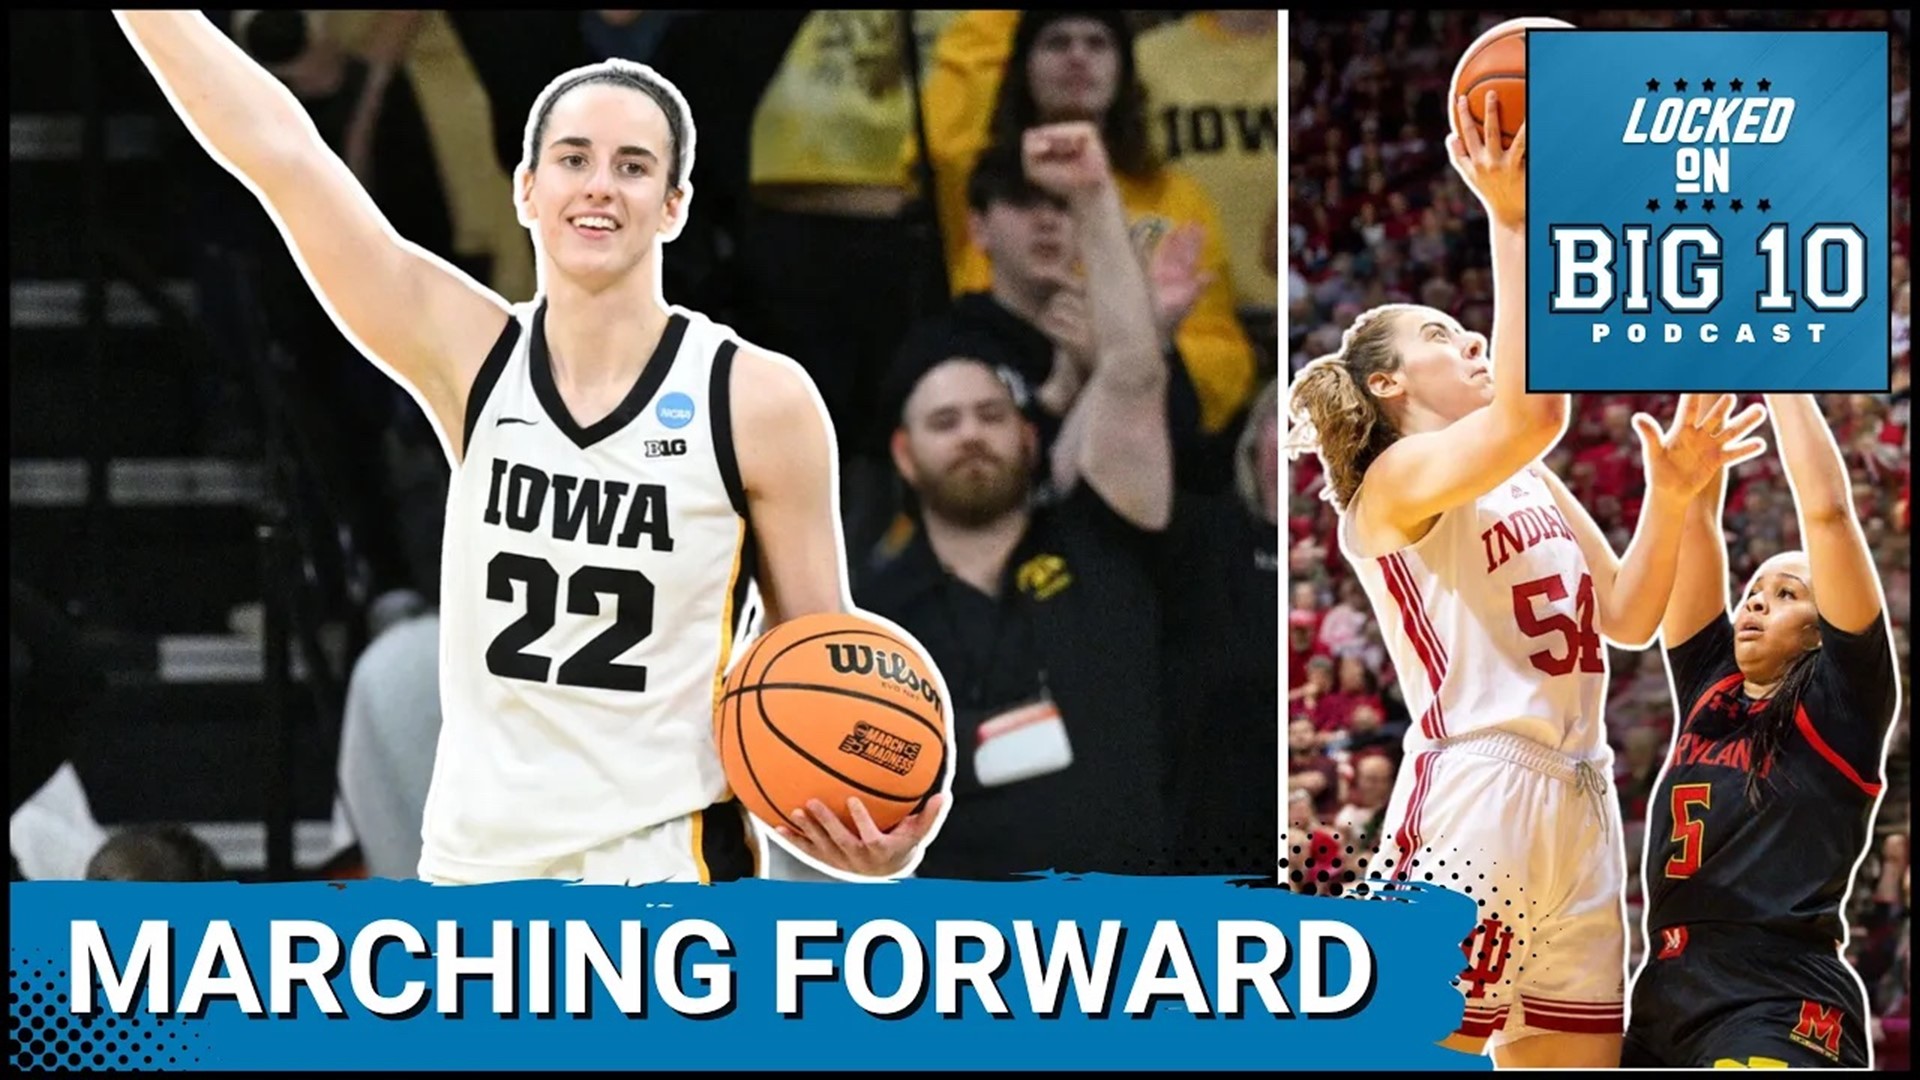 Caitlin Clark and the Iowa Hawkeyes basketball team march forward to return to the women's NCAA Tournament Sweet 16.